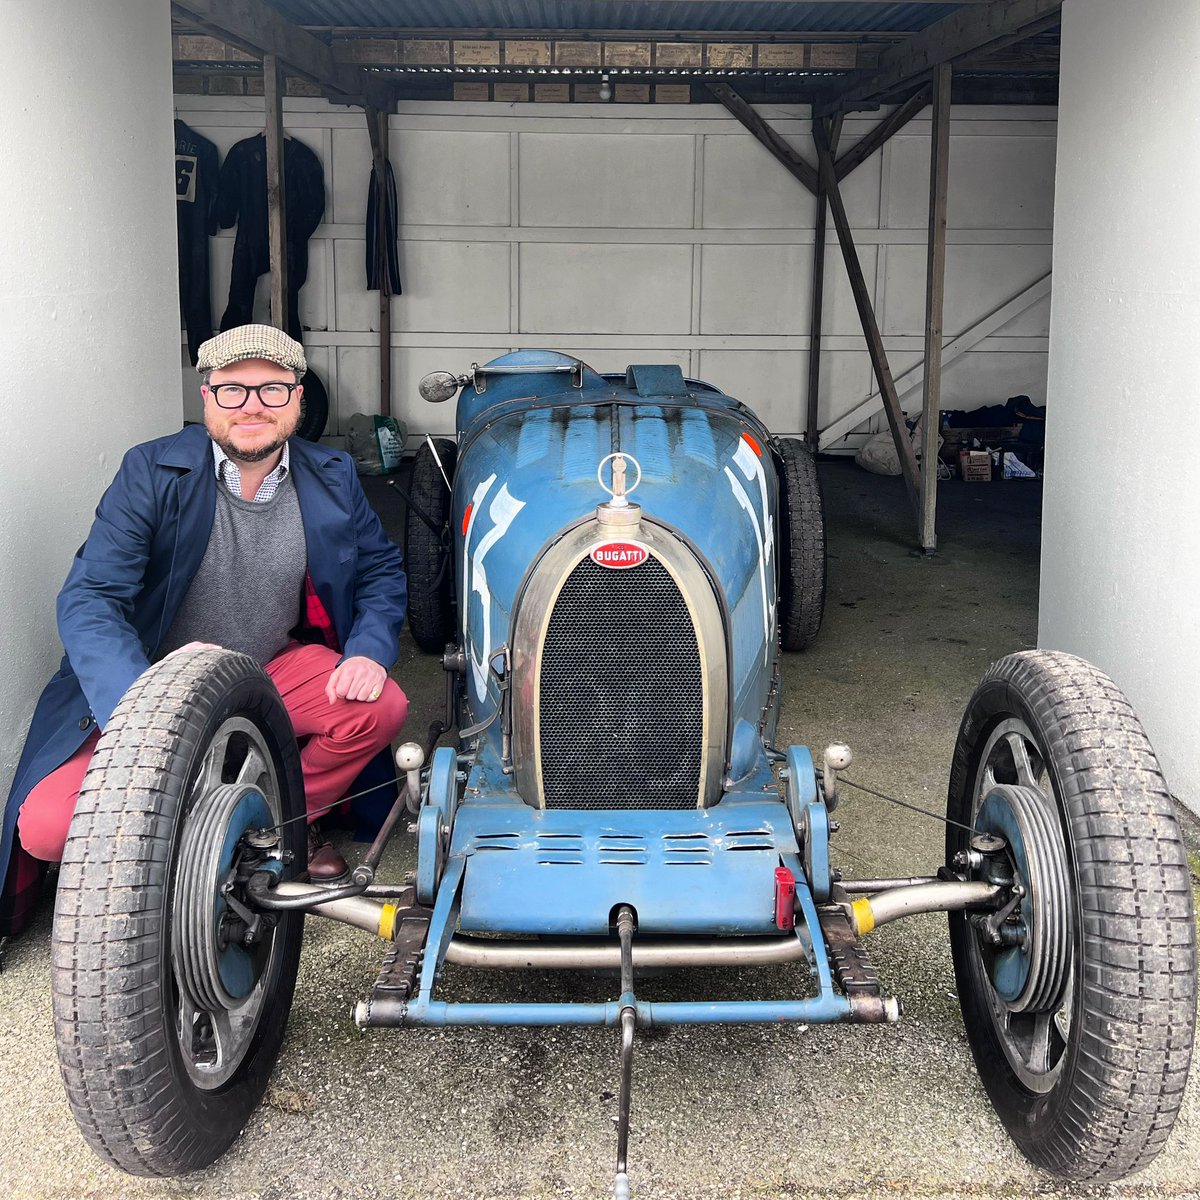 Another bloody great Members’ Meeting at the weekend. Thanks @GoodwoodRRC